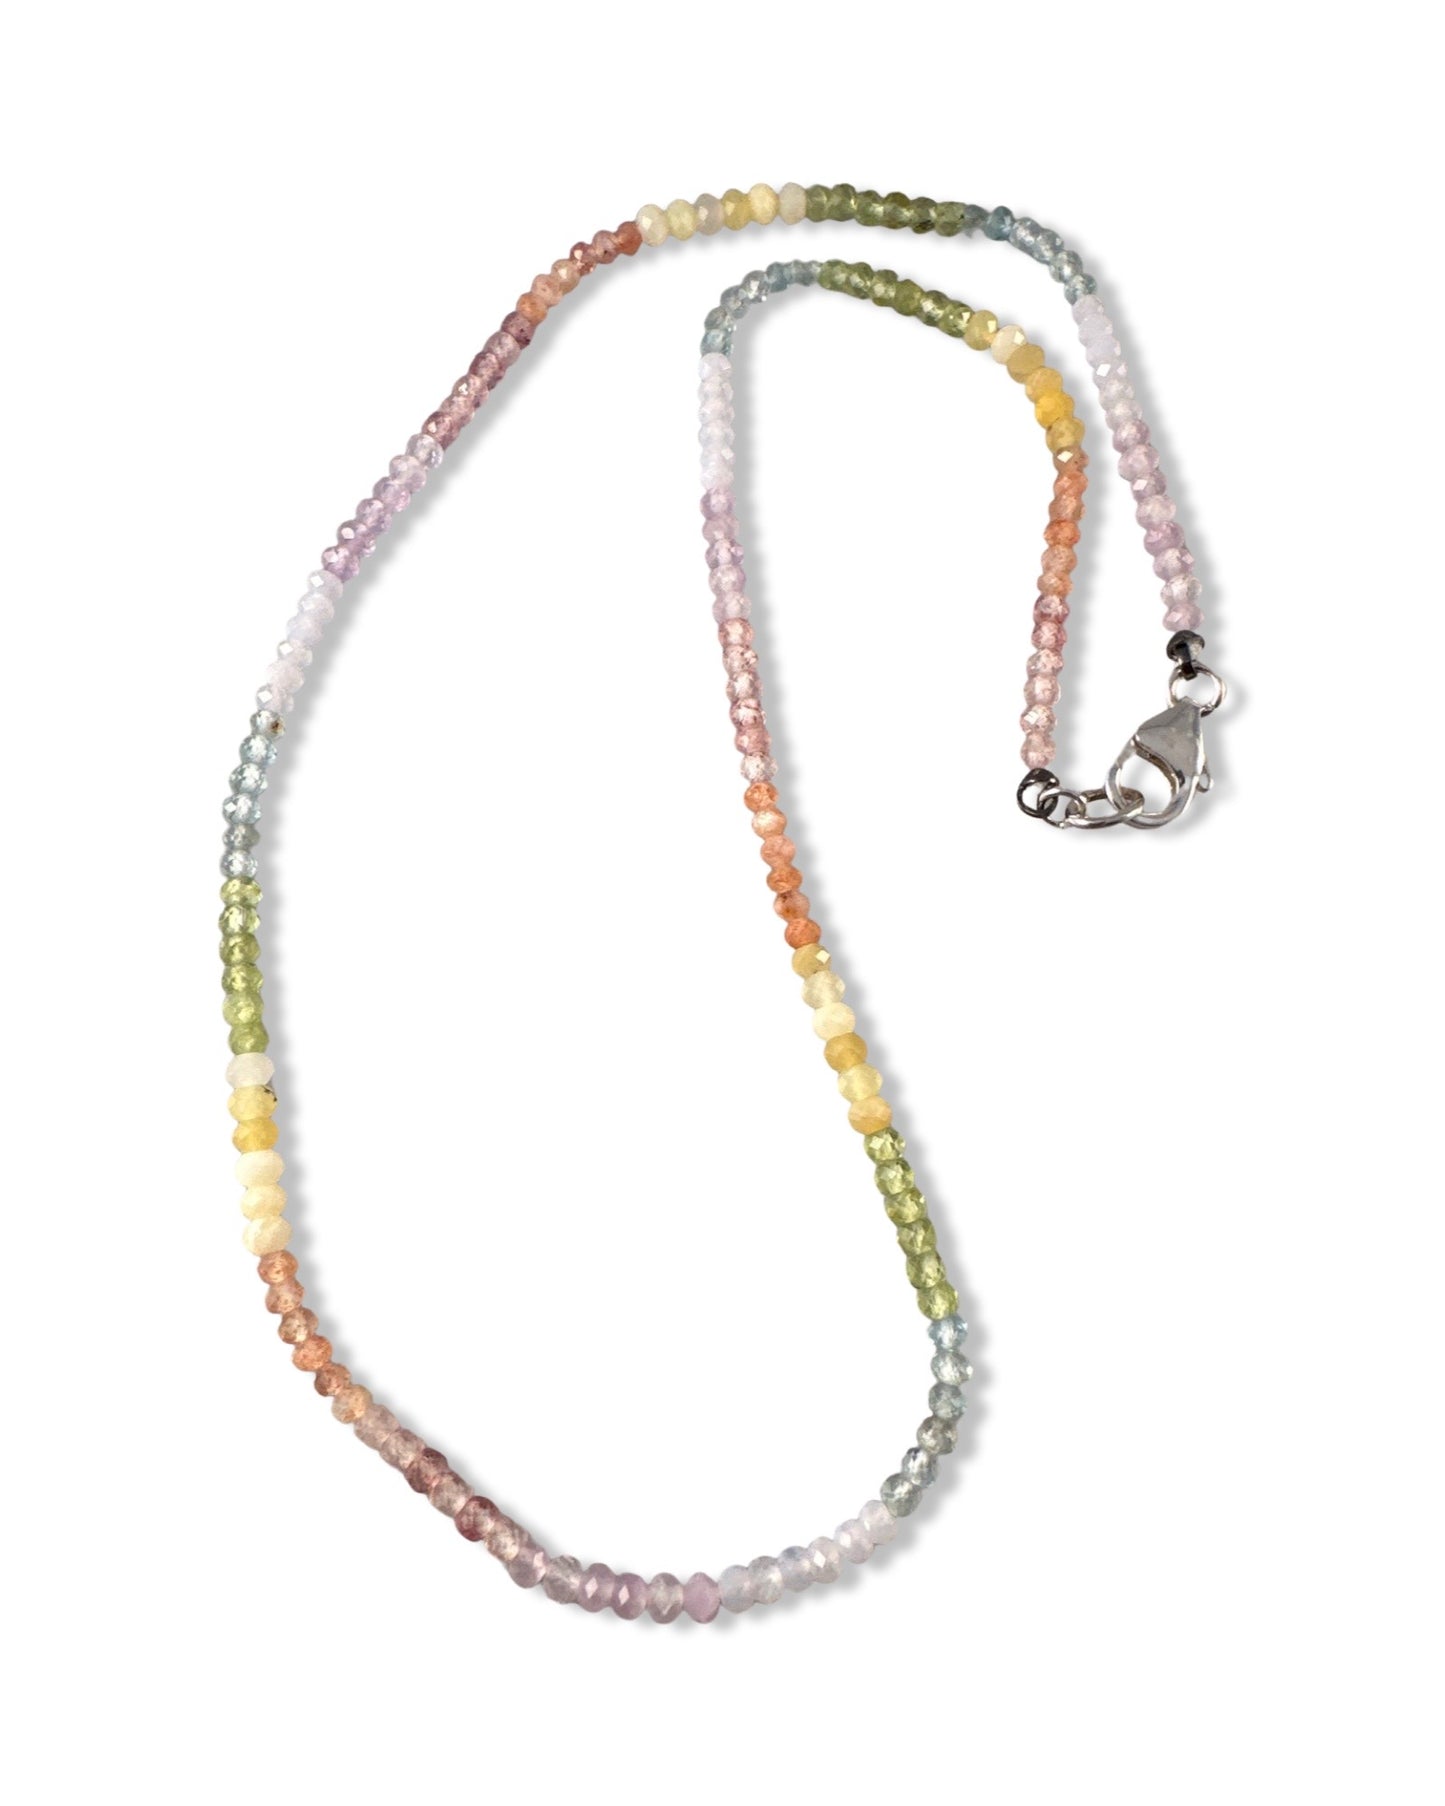 16" Faceted Gemstone Chakra Necklace